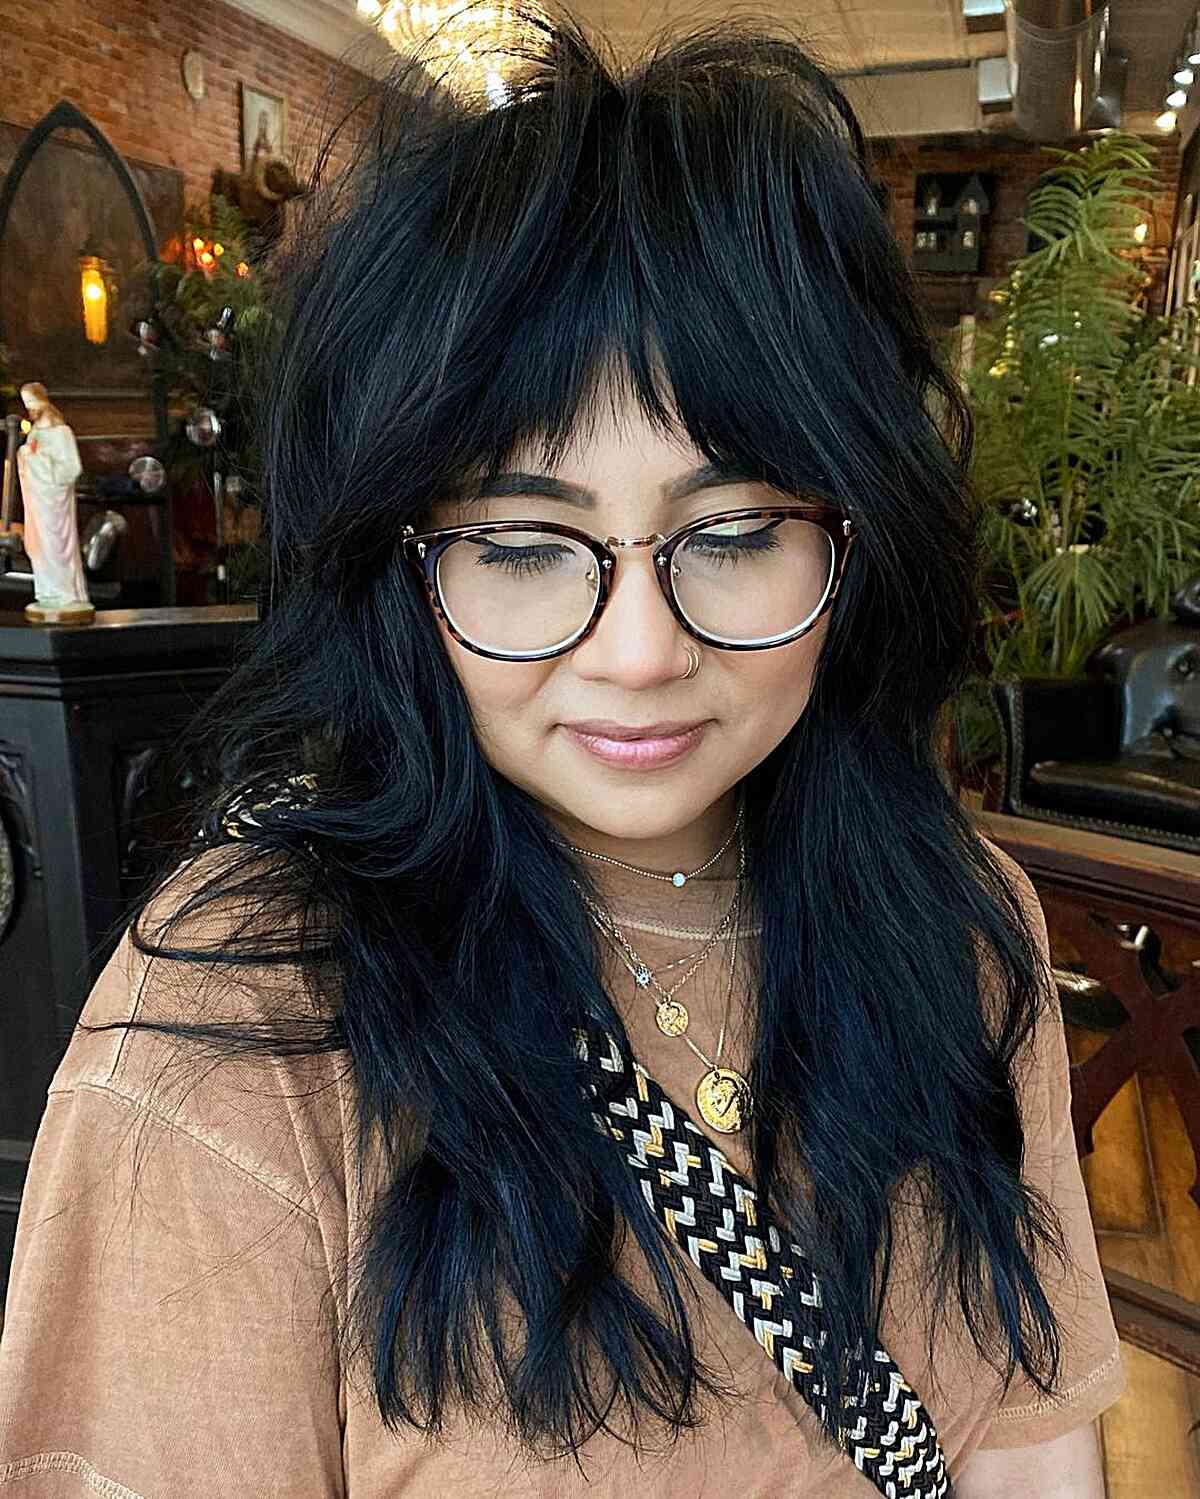 Jet Black Face-Framing Thick Long Shag with Choppy Fringe for Women with Glasses